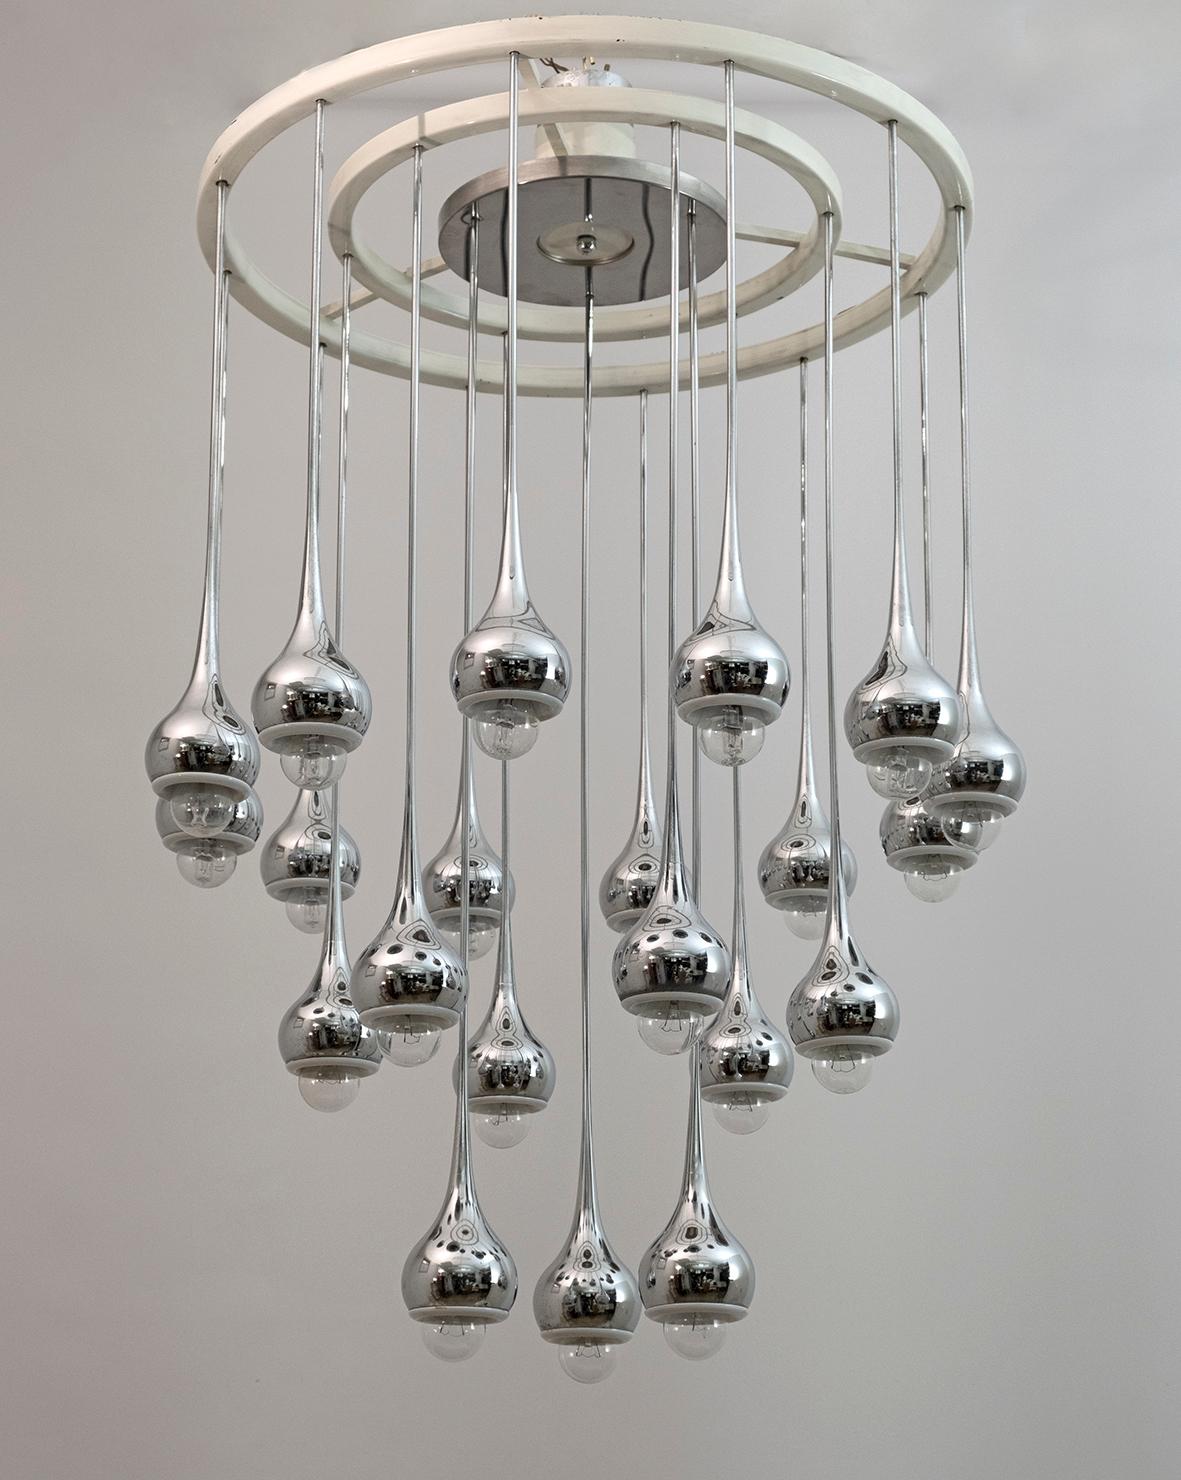 A surprising Esperia chandelier, 21 chromed metal pendants depicting water drops dripping from the ceiling.